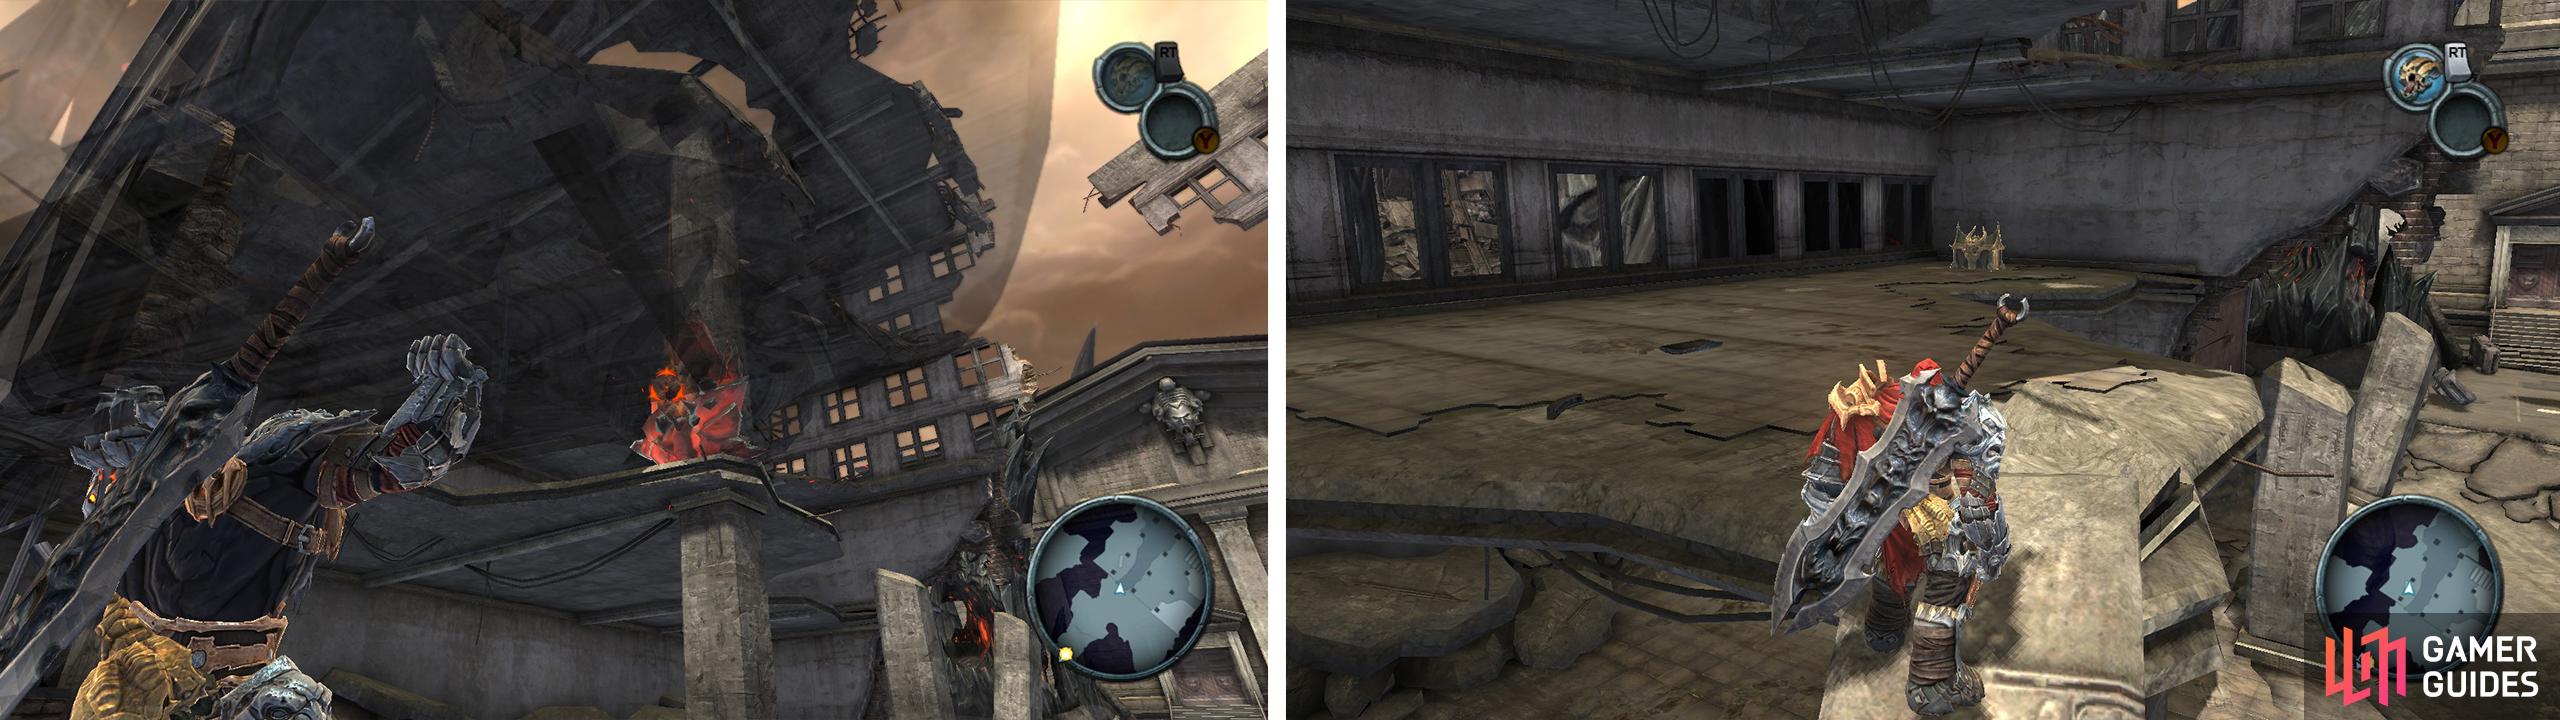 Throw a car at the bomb on the pillar (left). Climb it to find a piece of Abyssal Armour (right).